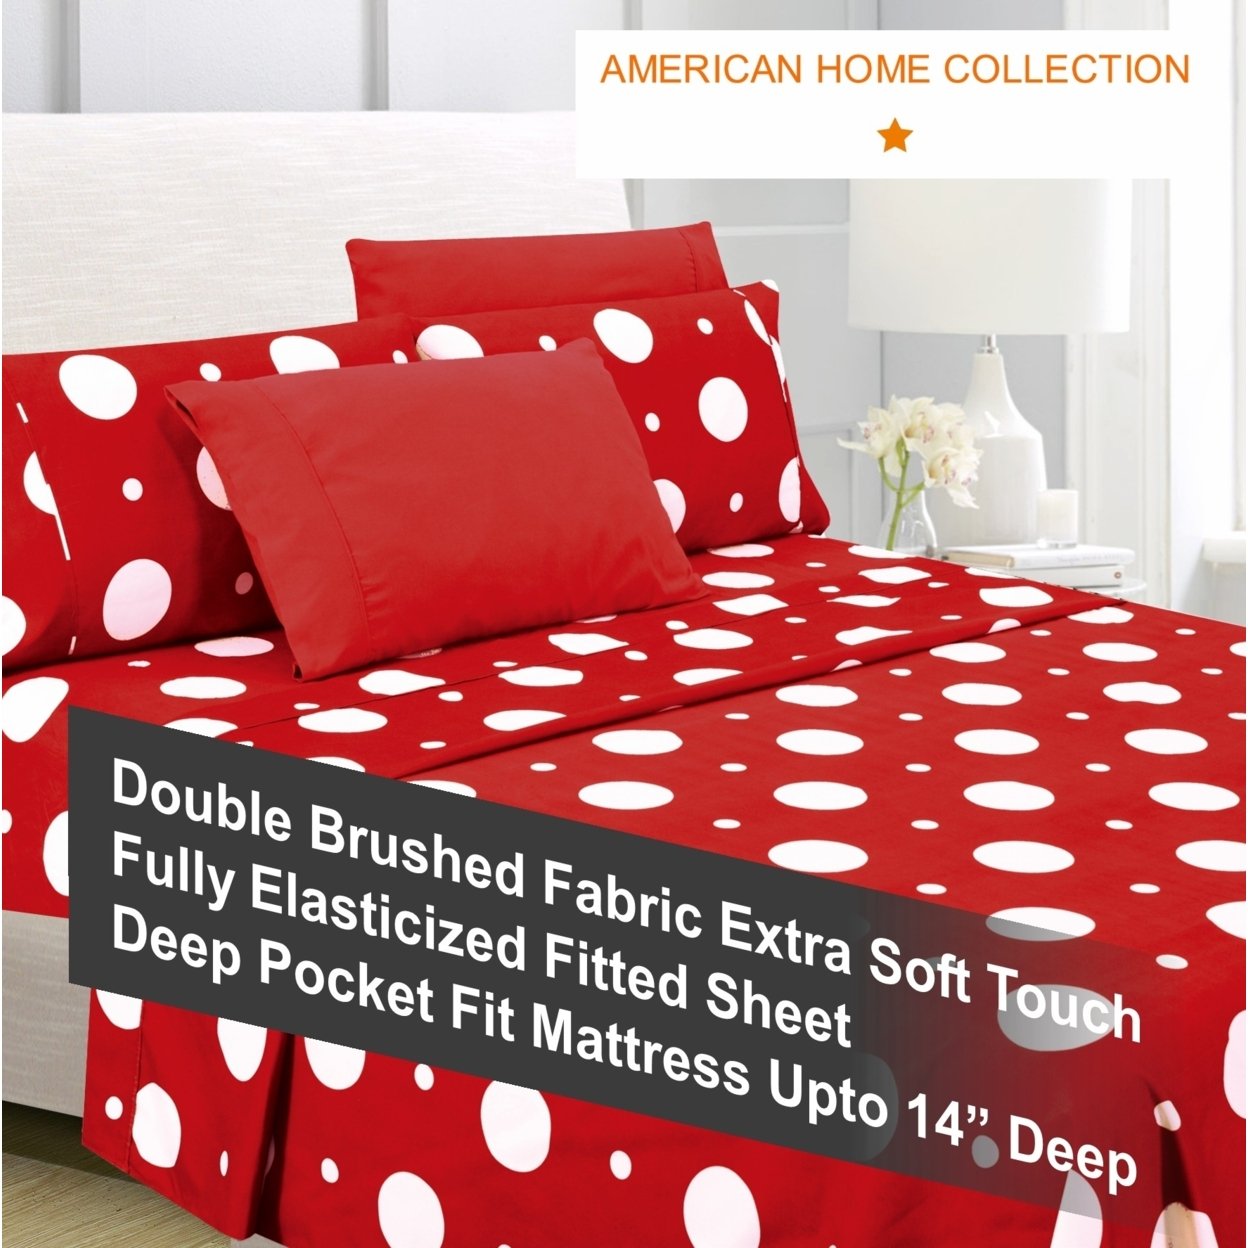 American Home Collection Ultra Soft 4-6 Piece Polka Dot Printed Bed Sheet Set - Queen, Blue